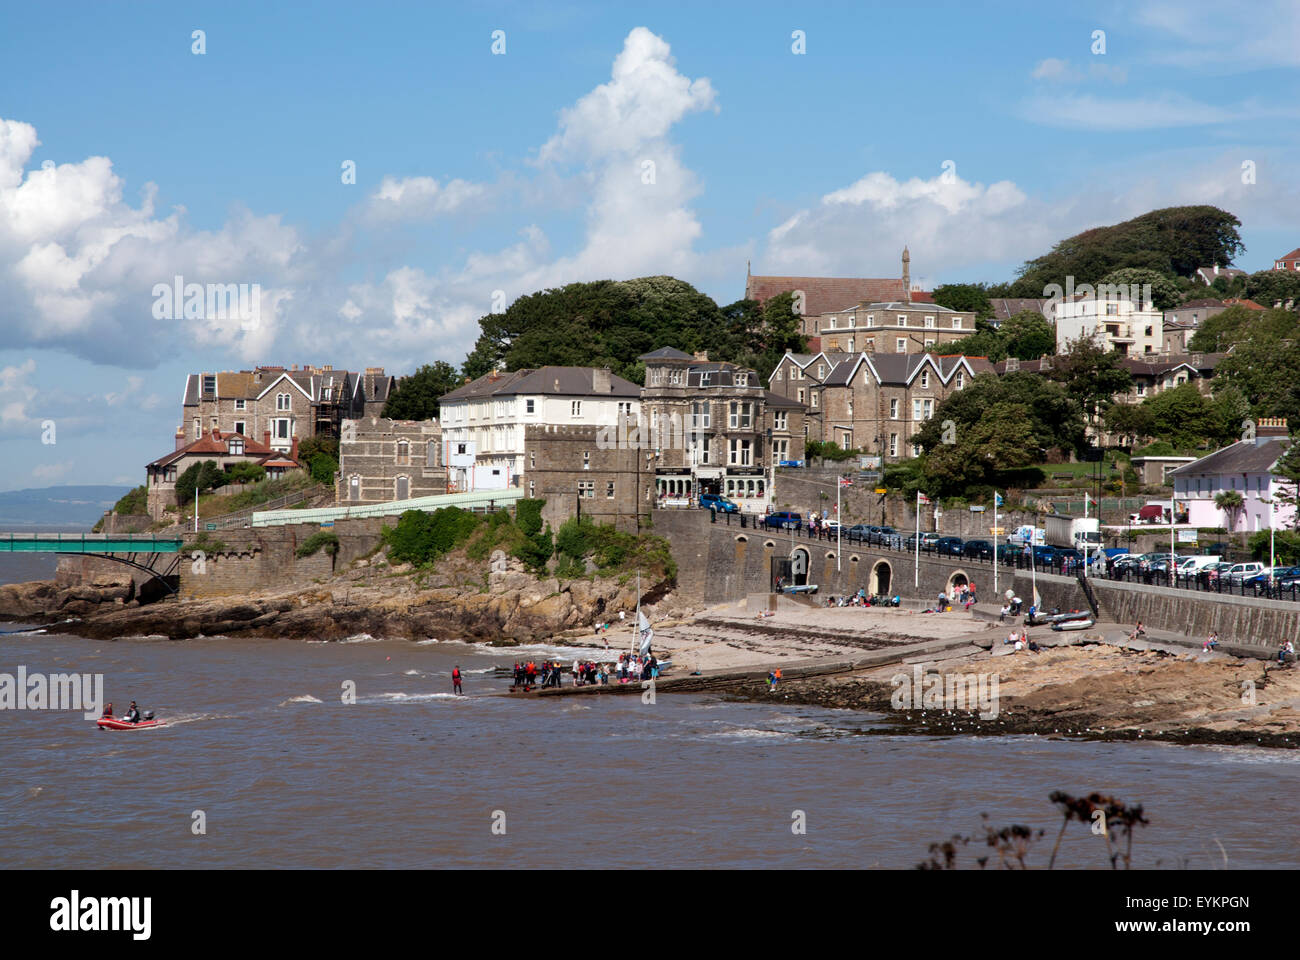 Clevedon town and coast Clevedon, Somerset, England UK Stock Photo